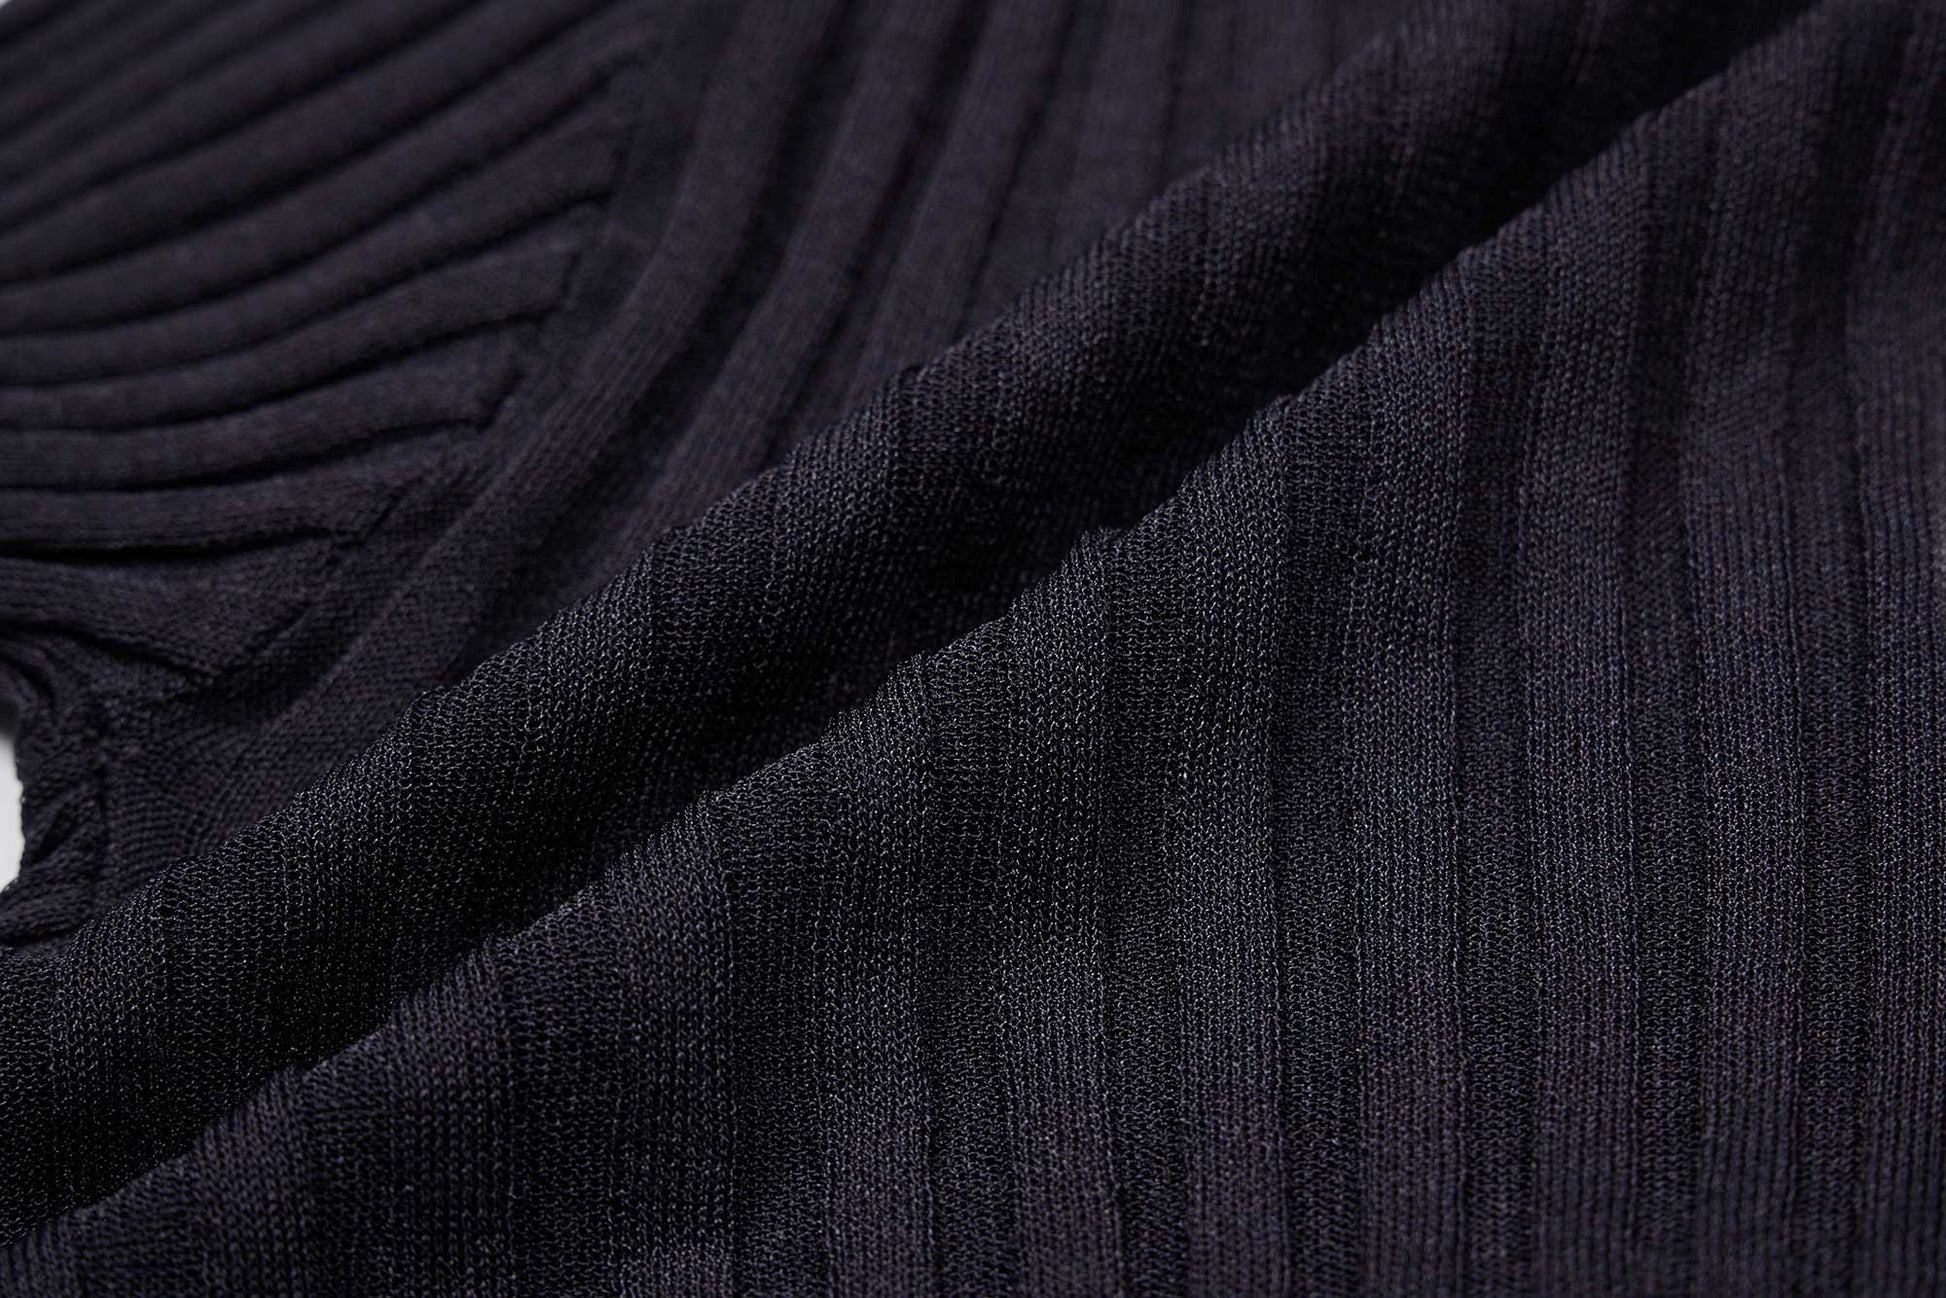 a close up of the ribbed textured knitwear fabric